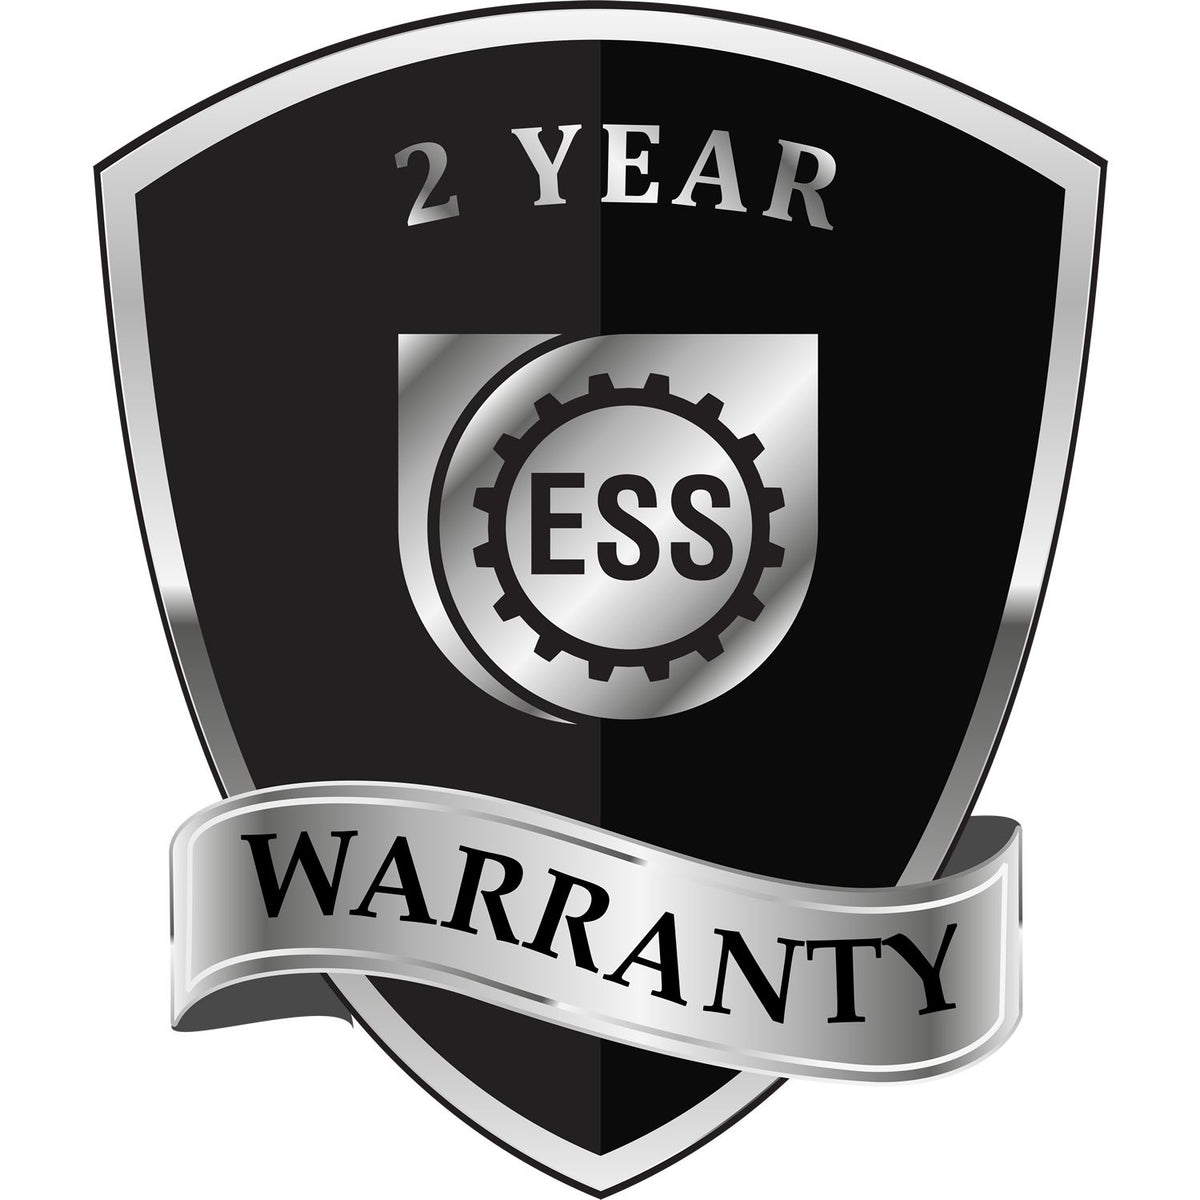 A black and silver badge or emblem showing warranty information for the Gift New Hampshire Geologist Seal